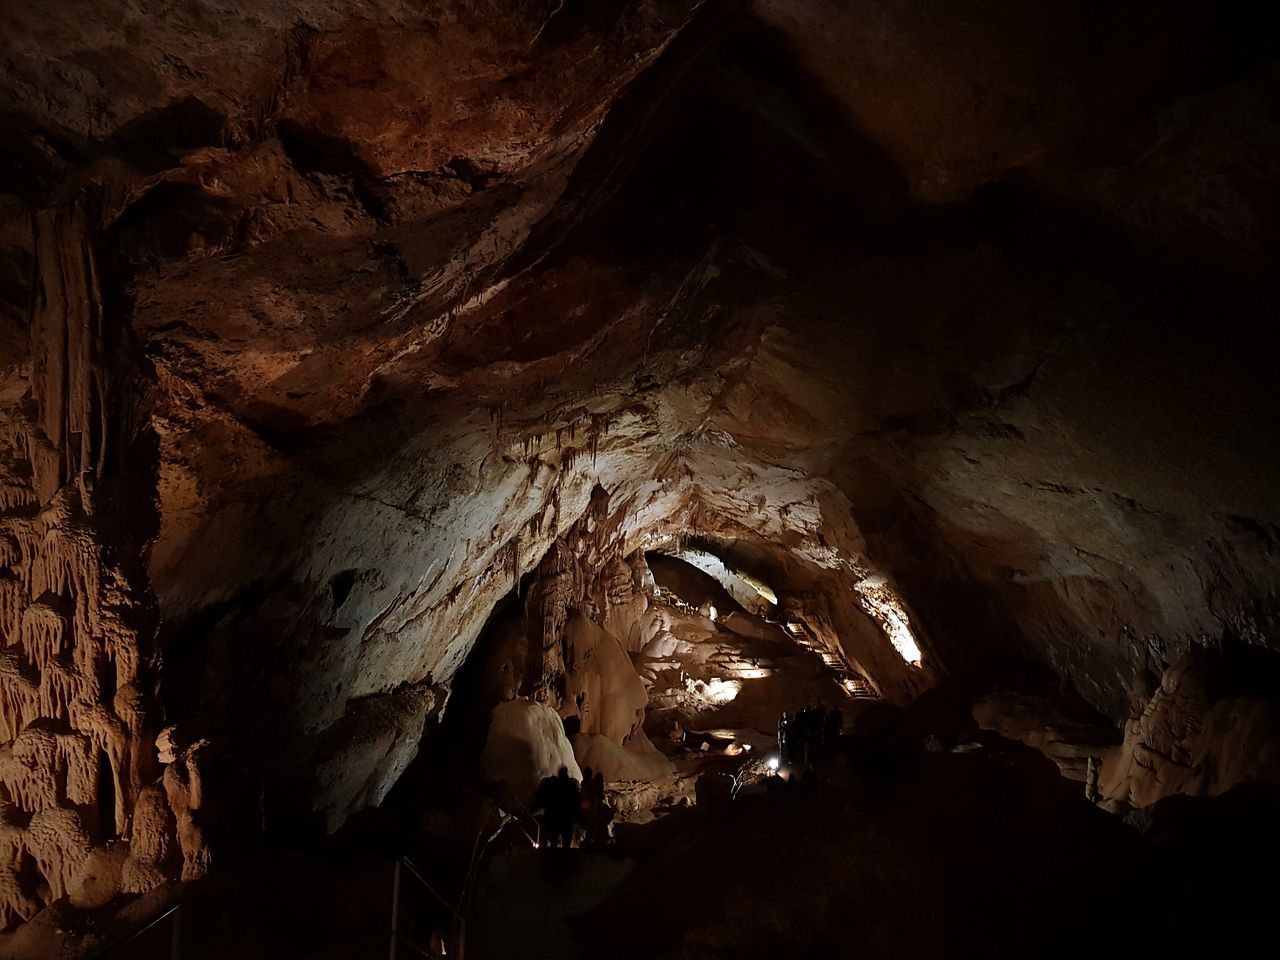 cave, stalactite, rock formation, rock, geology, rock - object, physical geography, indoors, no people, solid, natural pattern, beauty in nature, low angle view, rough, nature, textured, tranquility, illuminated, pattern, eroded